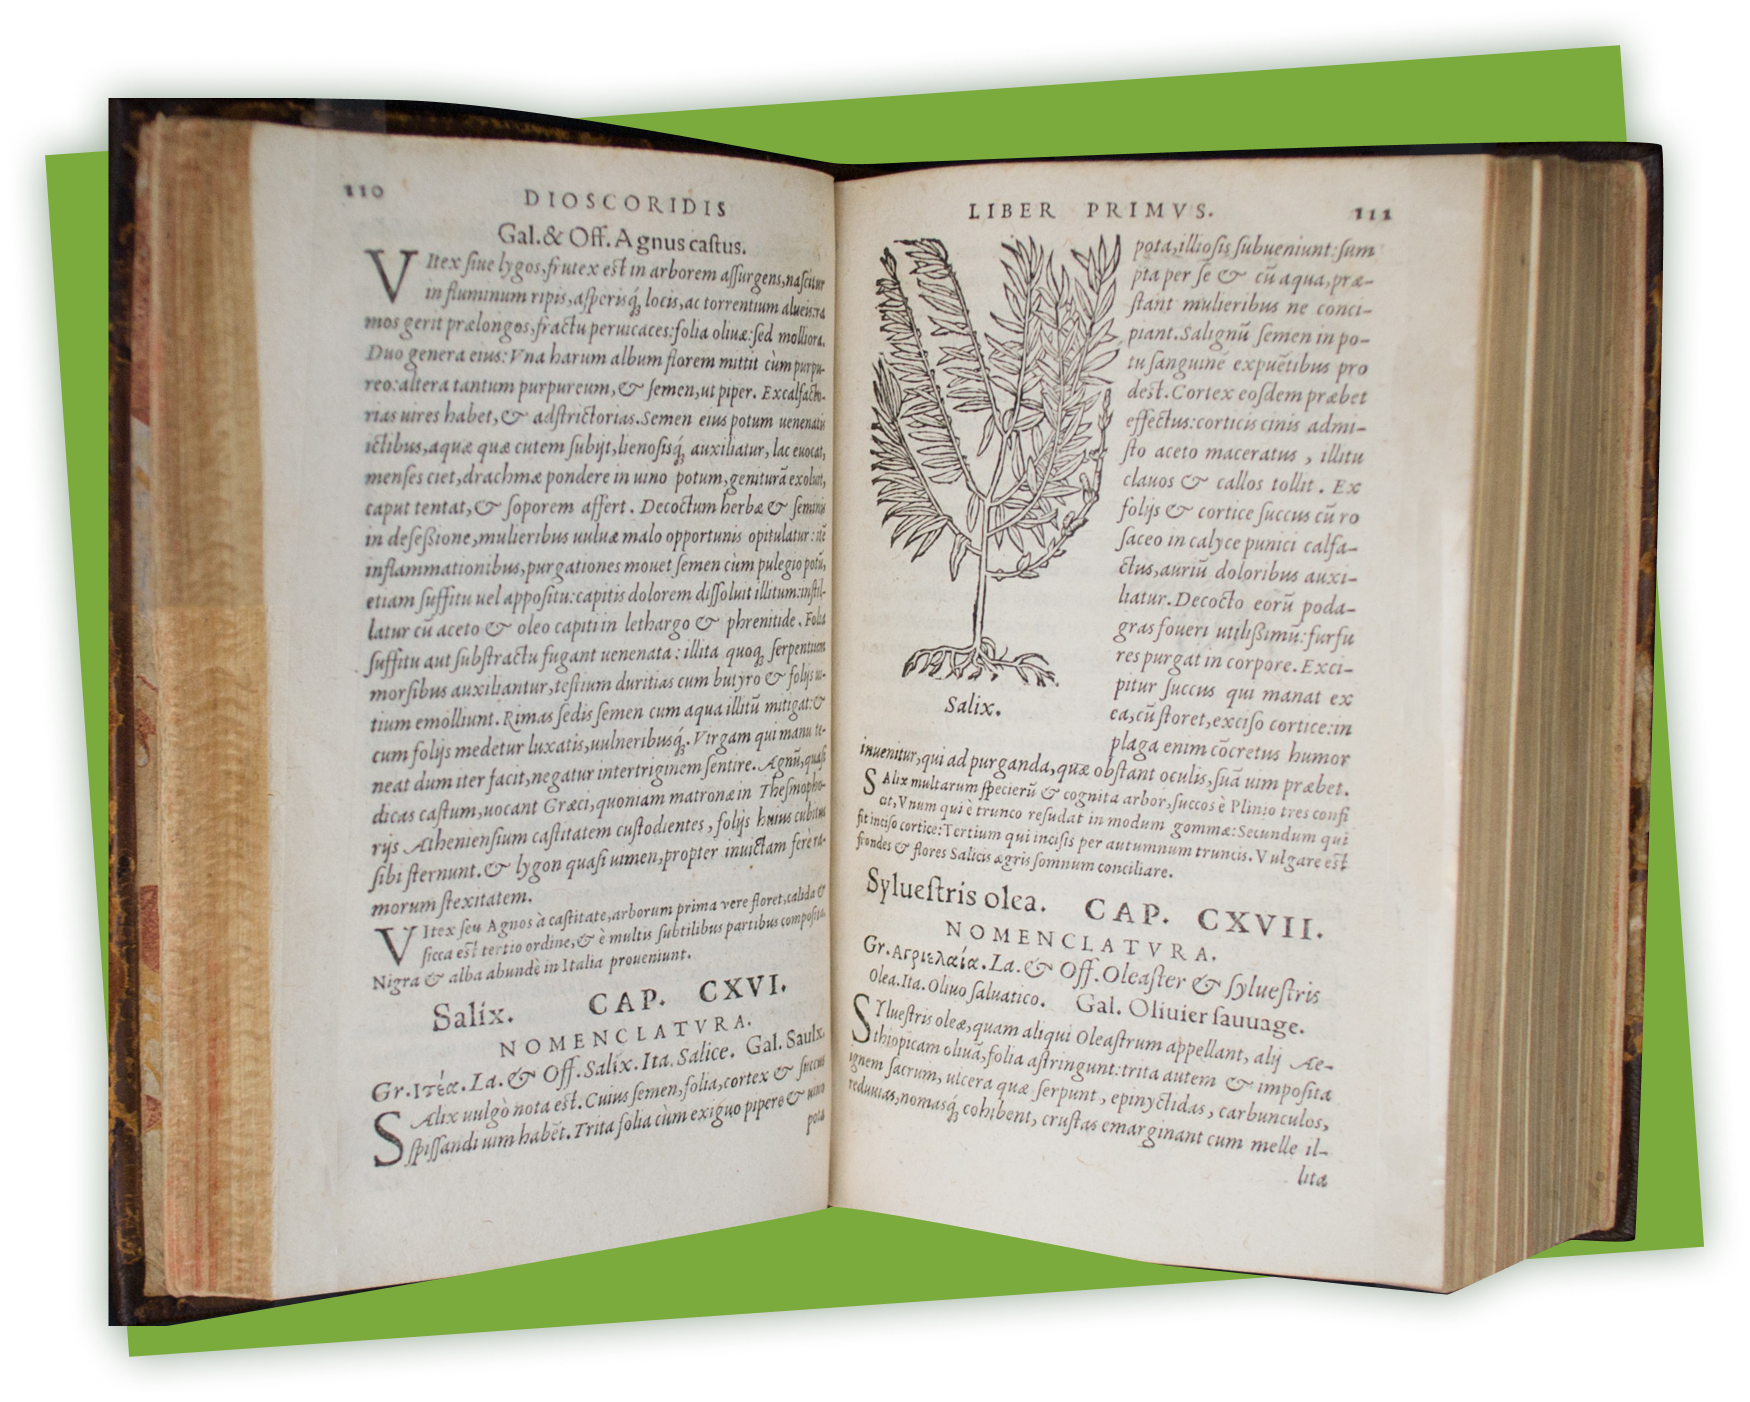 An open book showing text and an illustration of a plant